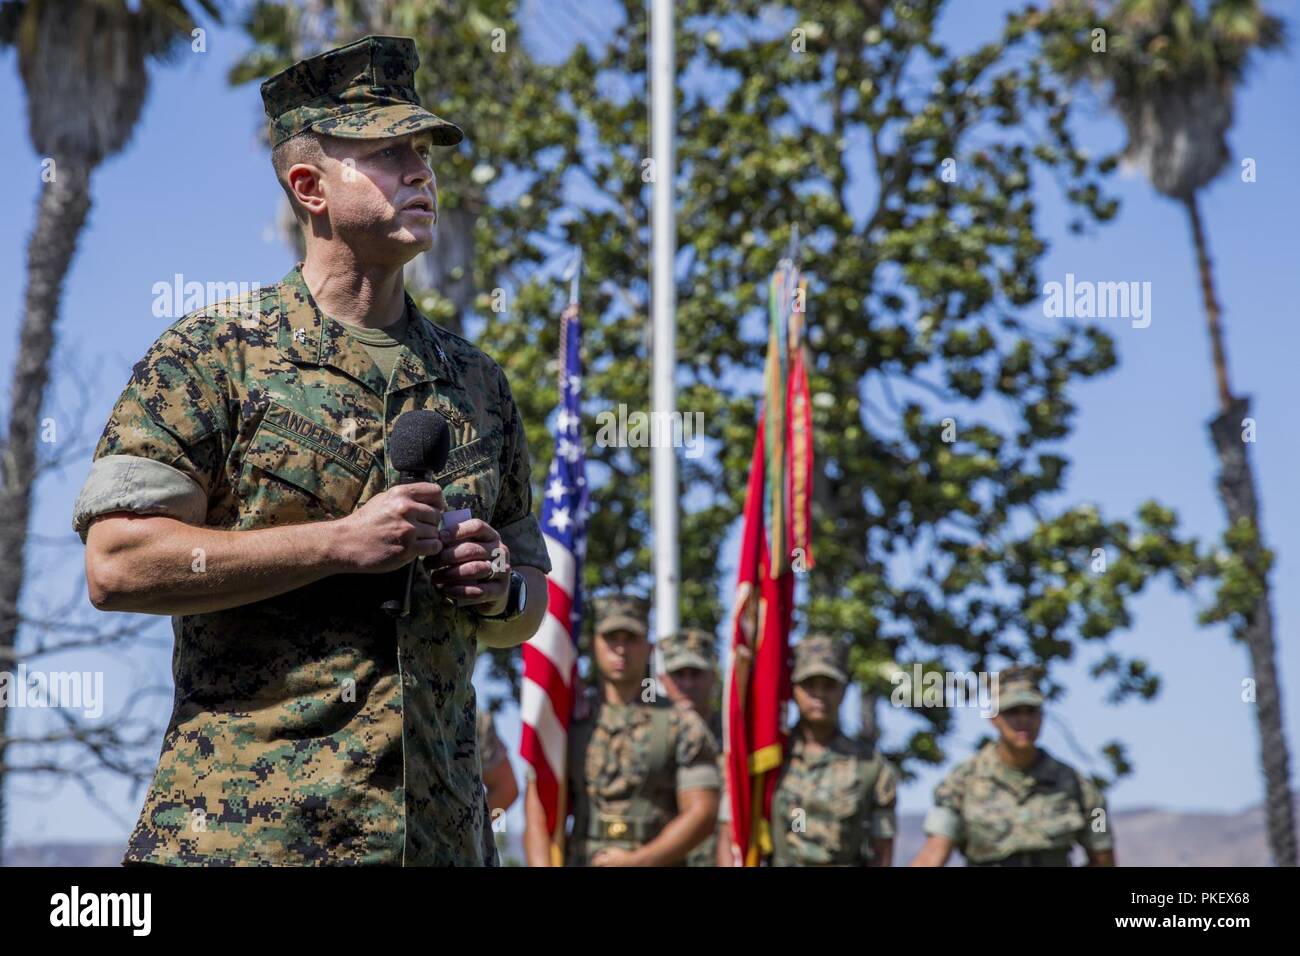 U.S. Marine Corps Col. Richard T. Anderson, incoming commanding officer, Marine Corps Air Station Camp Pendleton (MCAS), gives a speech during the MCAS Camp Pendleton change of command ceremony at the Santa Margarita Ranch House, Marine Corps Base Camp Pendleton, California, August 2, 2018. Anderson was commissioned as a second lieutenant in the Marine Corps in 1993. During his career, he led and trained many Marines, and was made a CH-53E Weapons and Tactics Instructor in October of 2001. Stock Photo